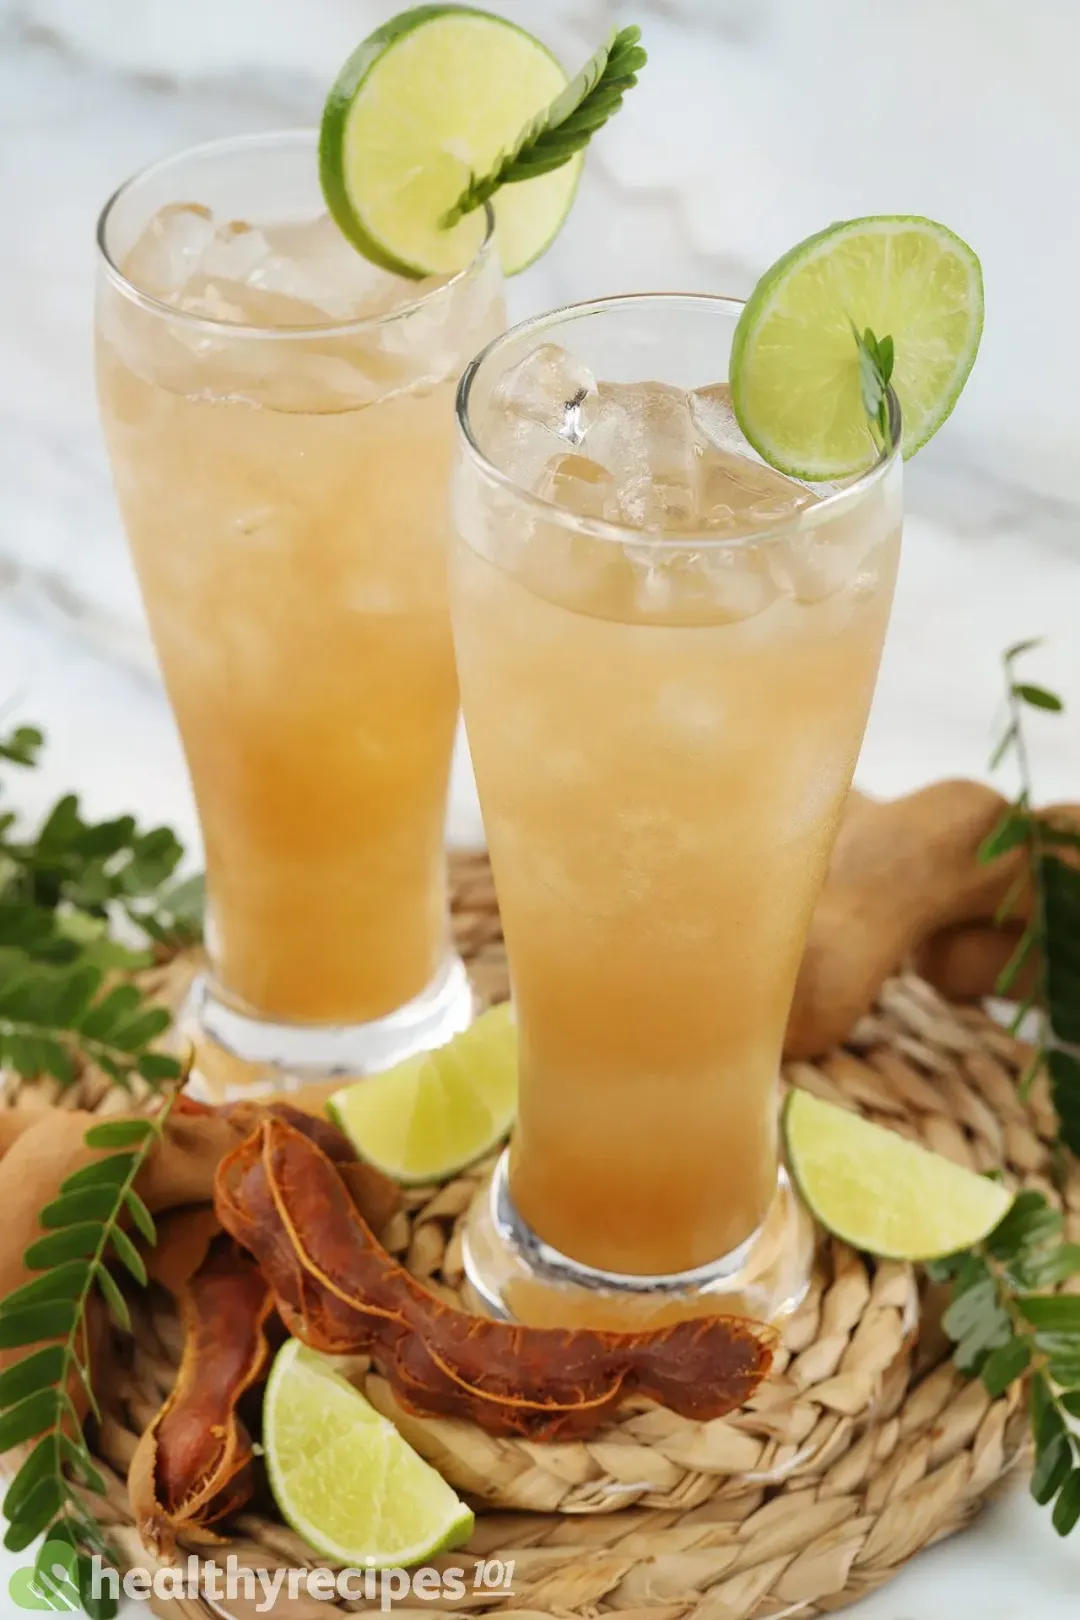 Two glasses of iced tamarind juice, garnished with lime wheels on the brim and peeled tamarinds on the side